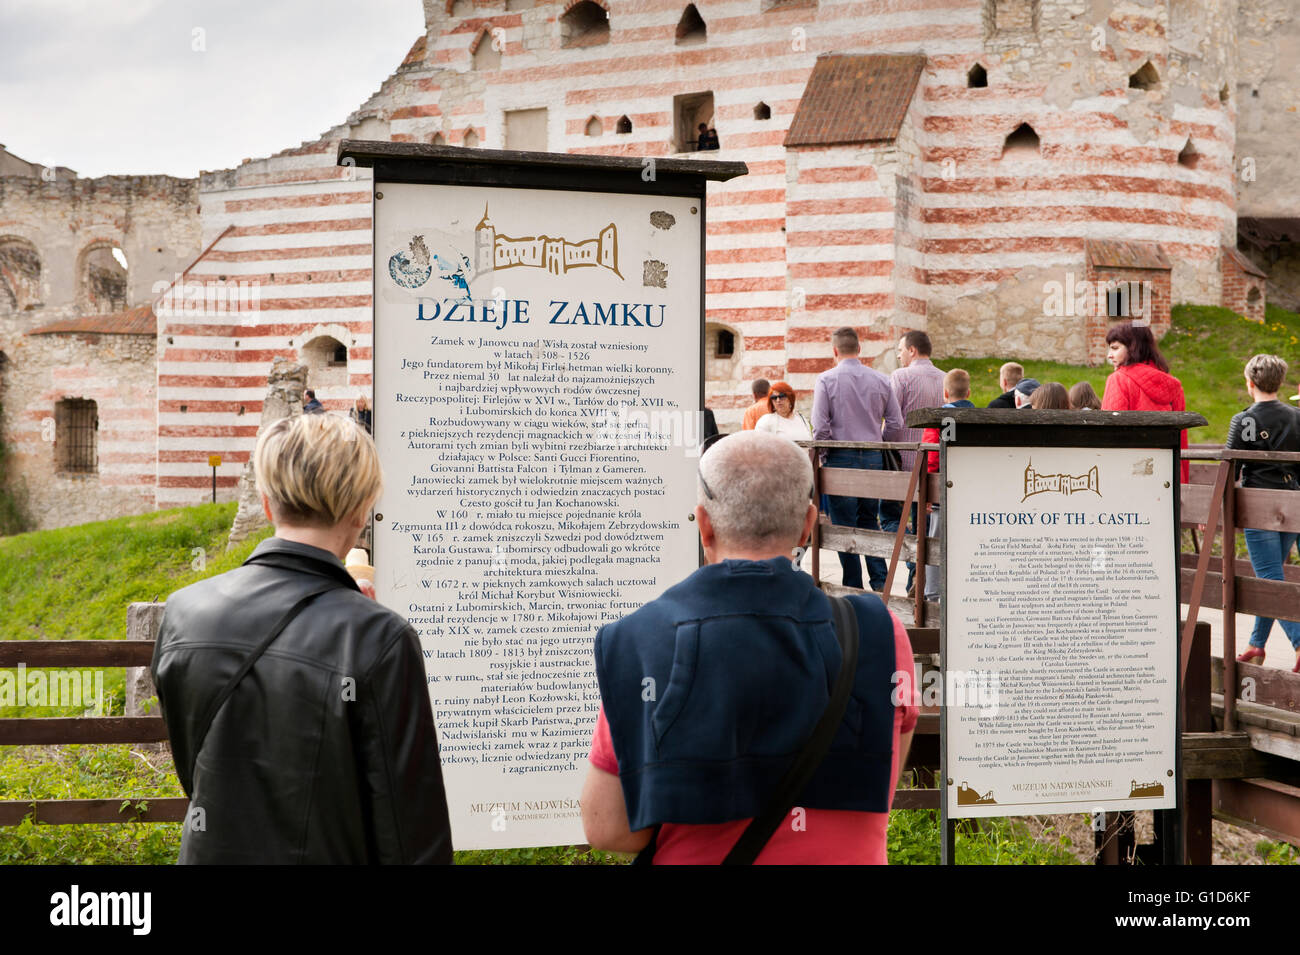 History of the Janowiec Castle, people reading the visitor information board in front of the bridge to historical building ruins Stock Photo